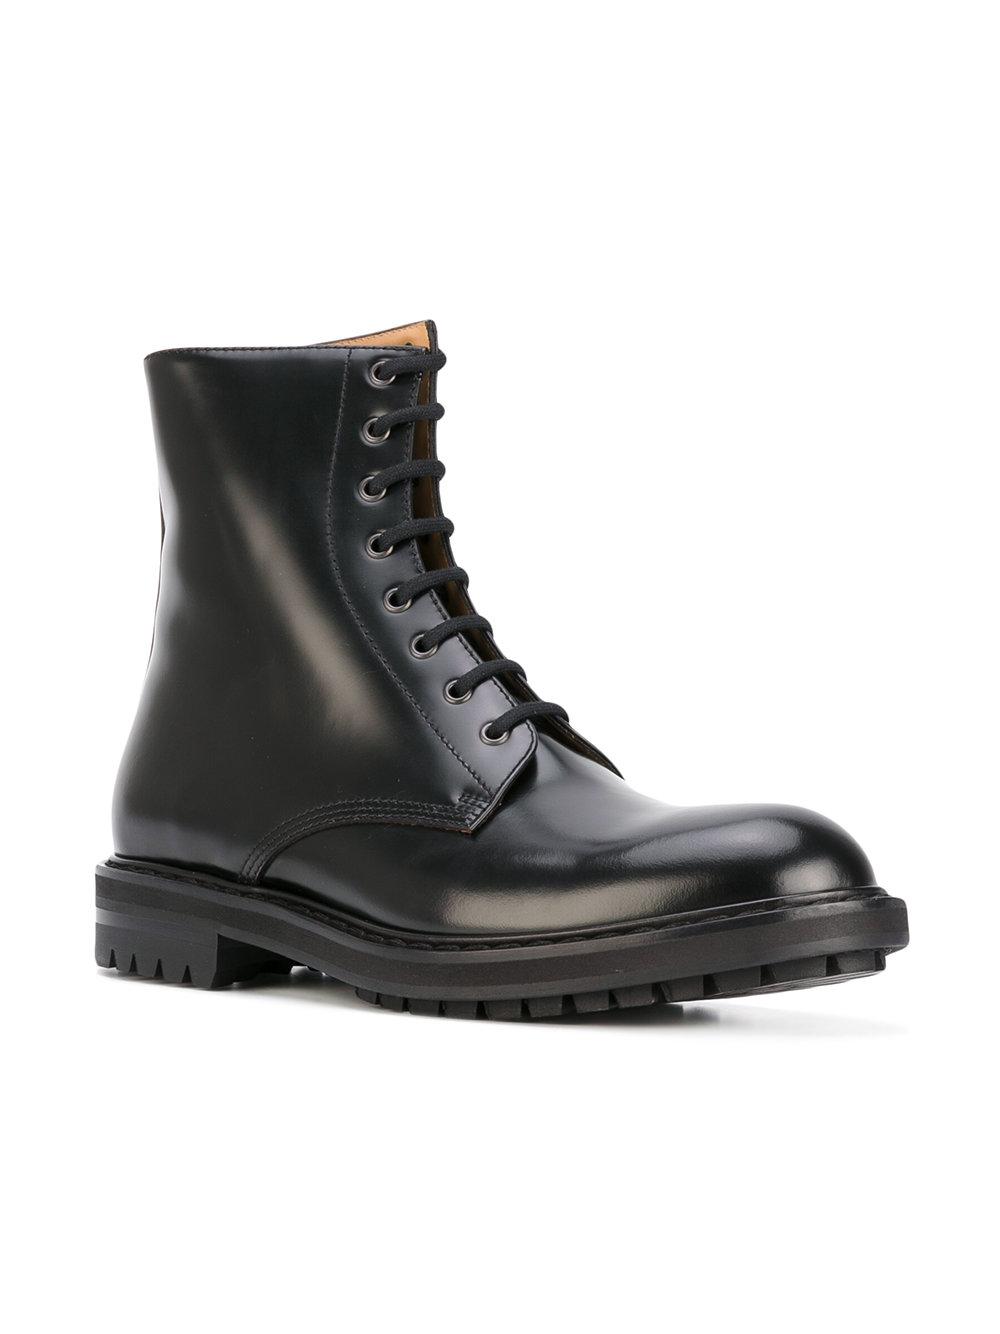 Alexander McQueen Leather Lace-up Boots in Black for Men - Lyst